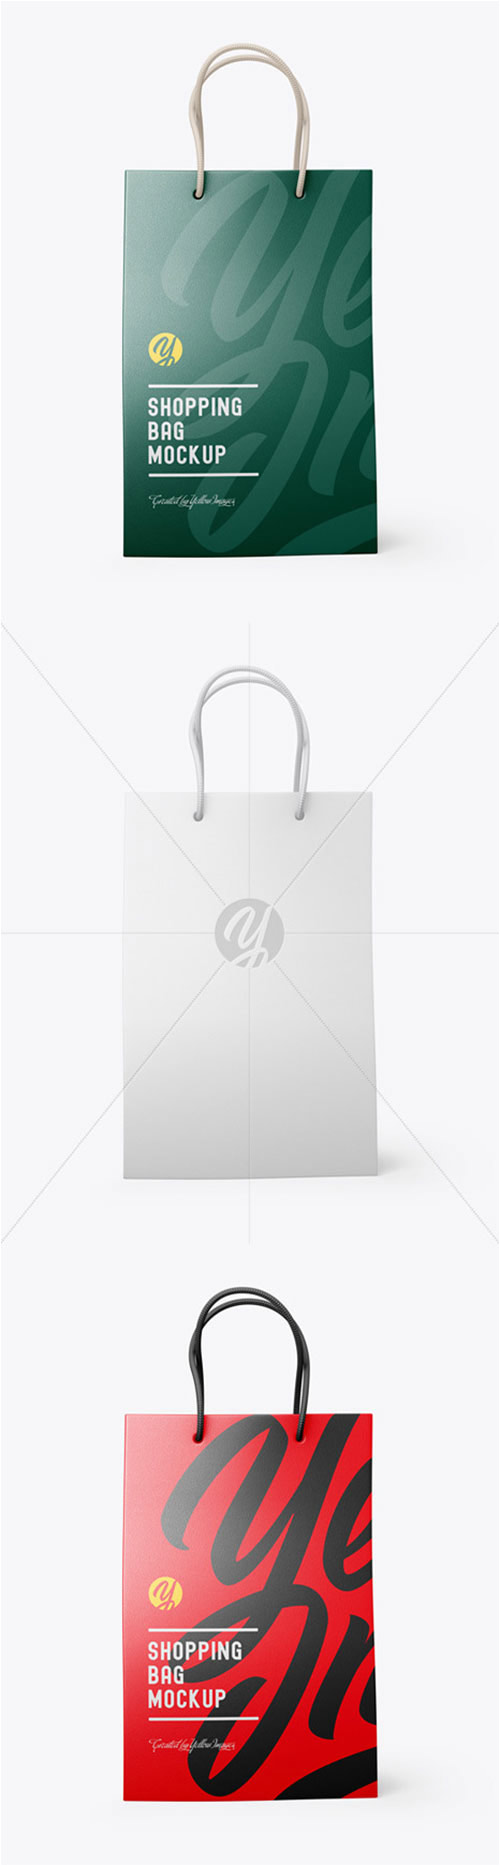 Leather Shopping Bag With Handles mockup 72478